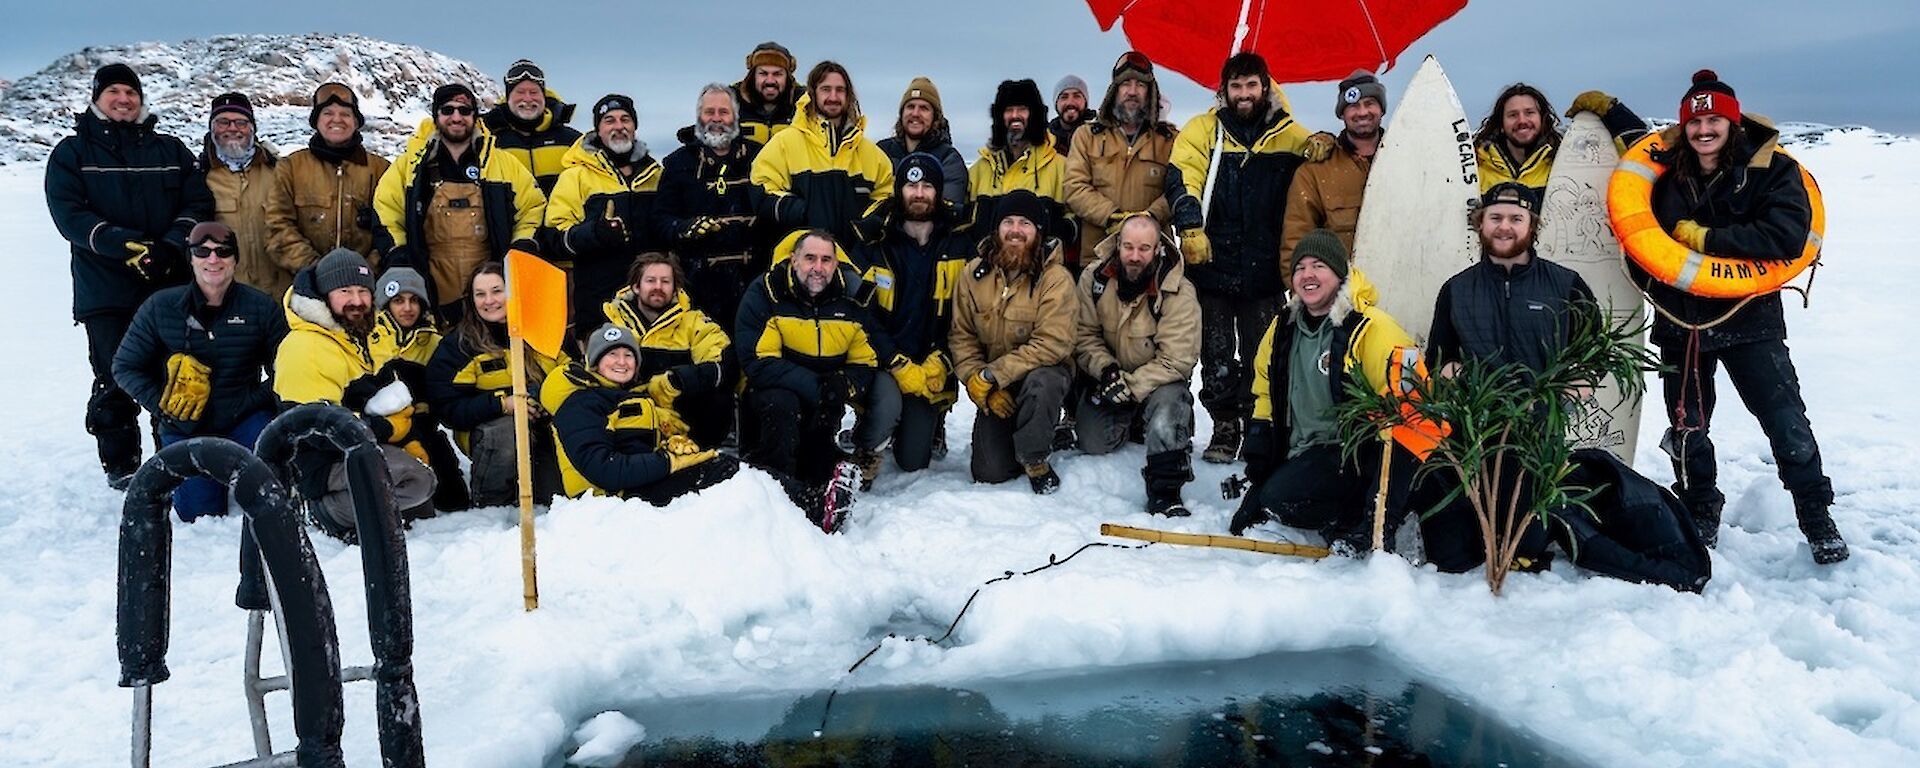 A group of about 30 people in Antarctic weatherproof clothing, arranged in 2 rows sitting, kneeling and standing by a square-shaped pool of water in a wide expanse of sea ice. A red beach and umbrella and a couple of surfboards are set up near the pool's edge for decoration